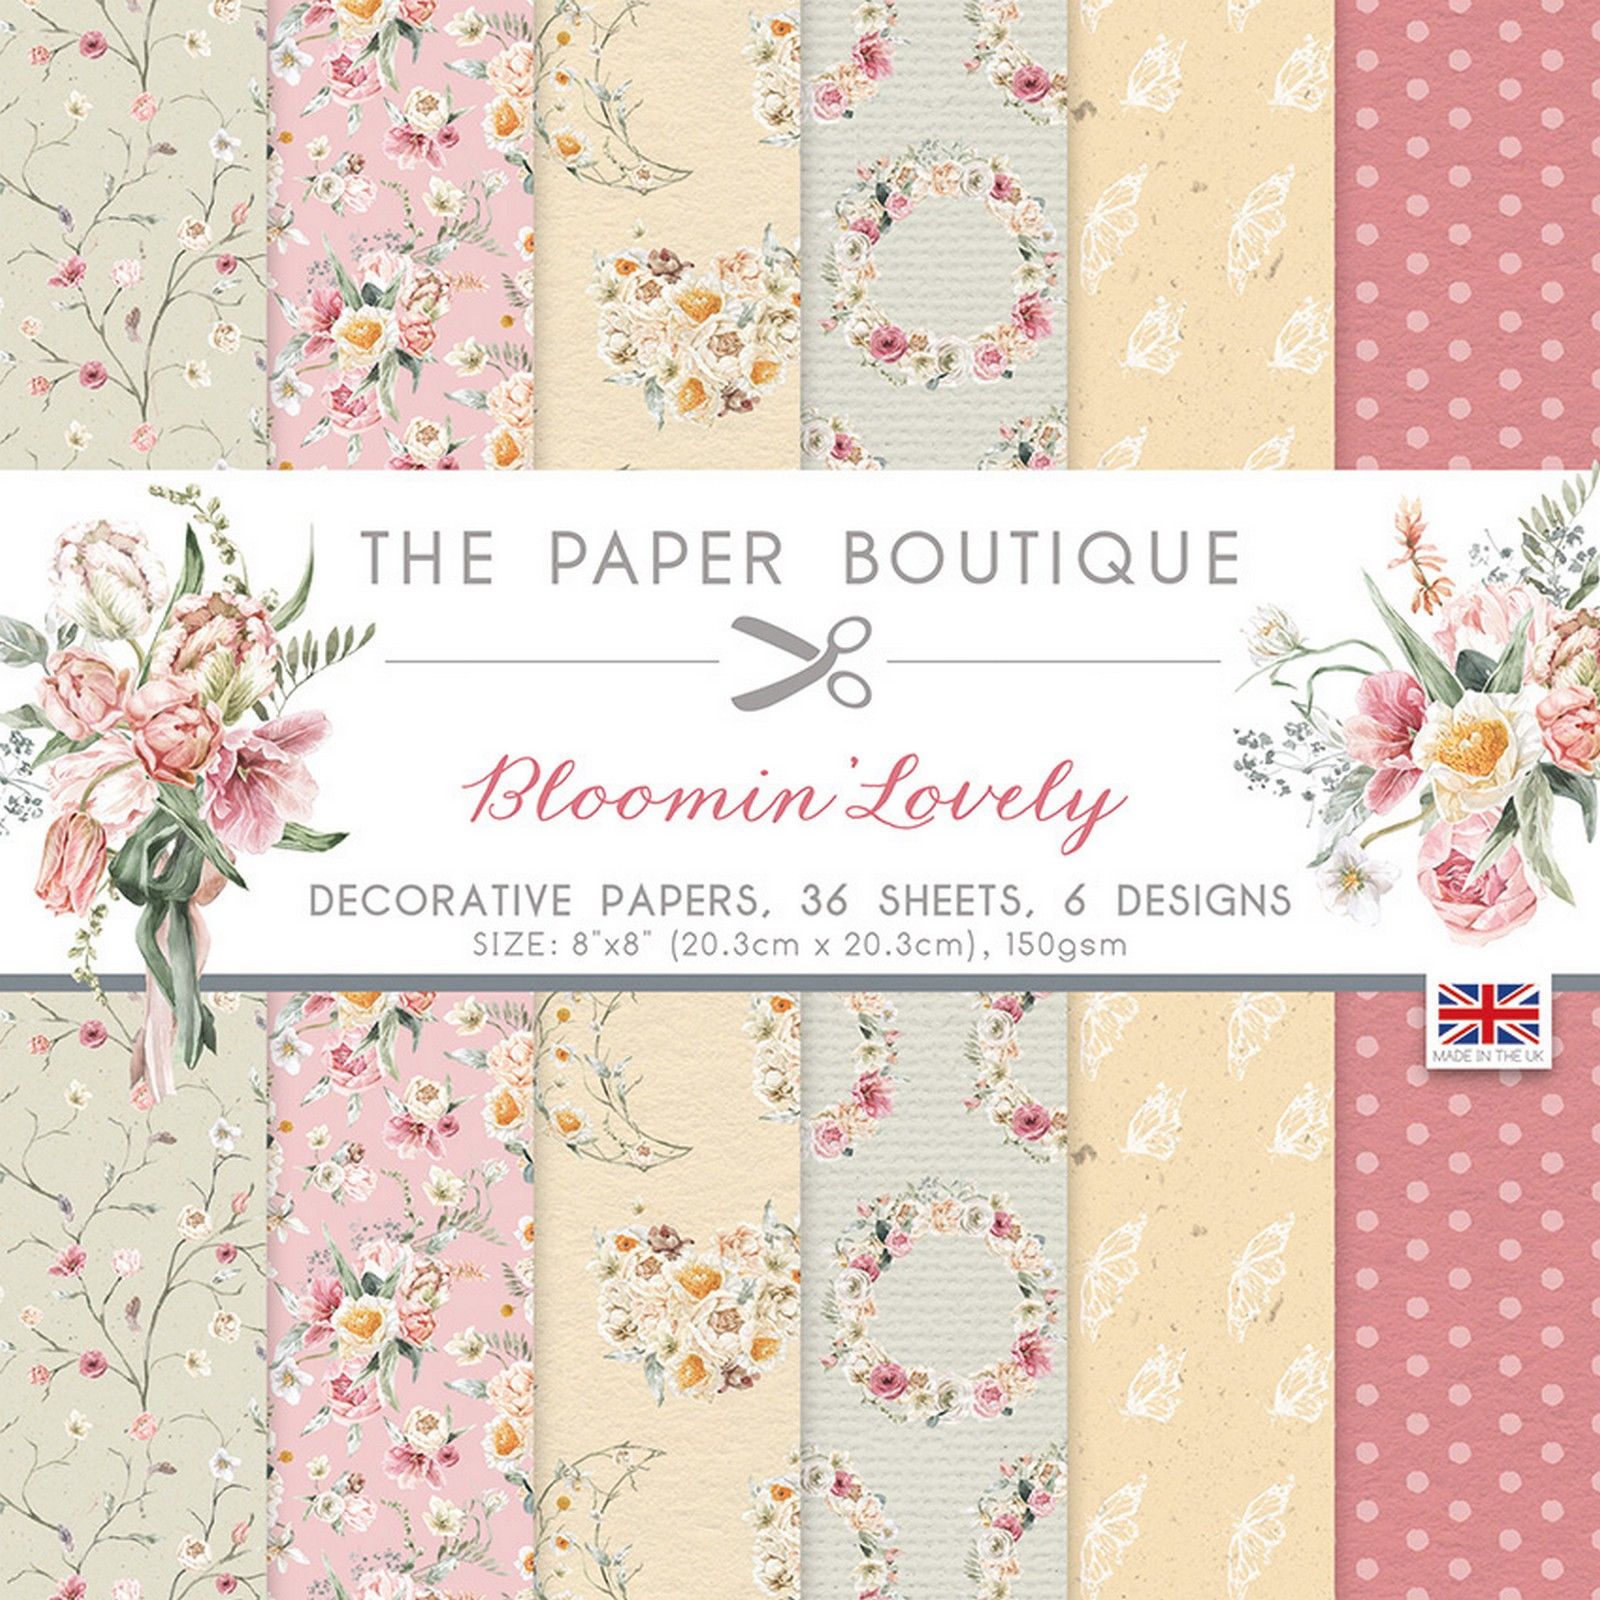 The Paper Boutique • Blooming lovely decorative papers